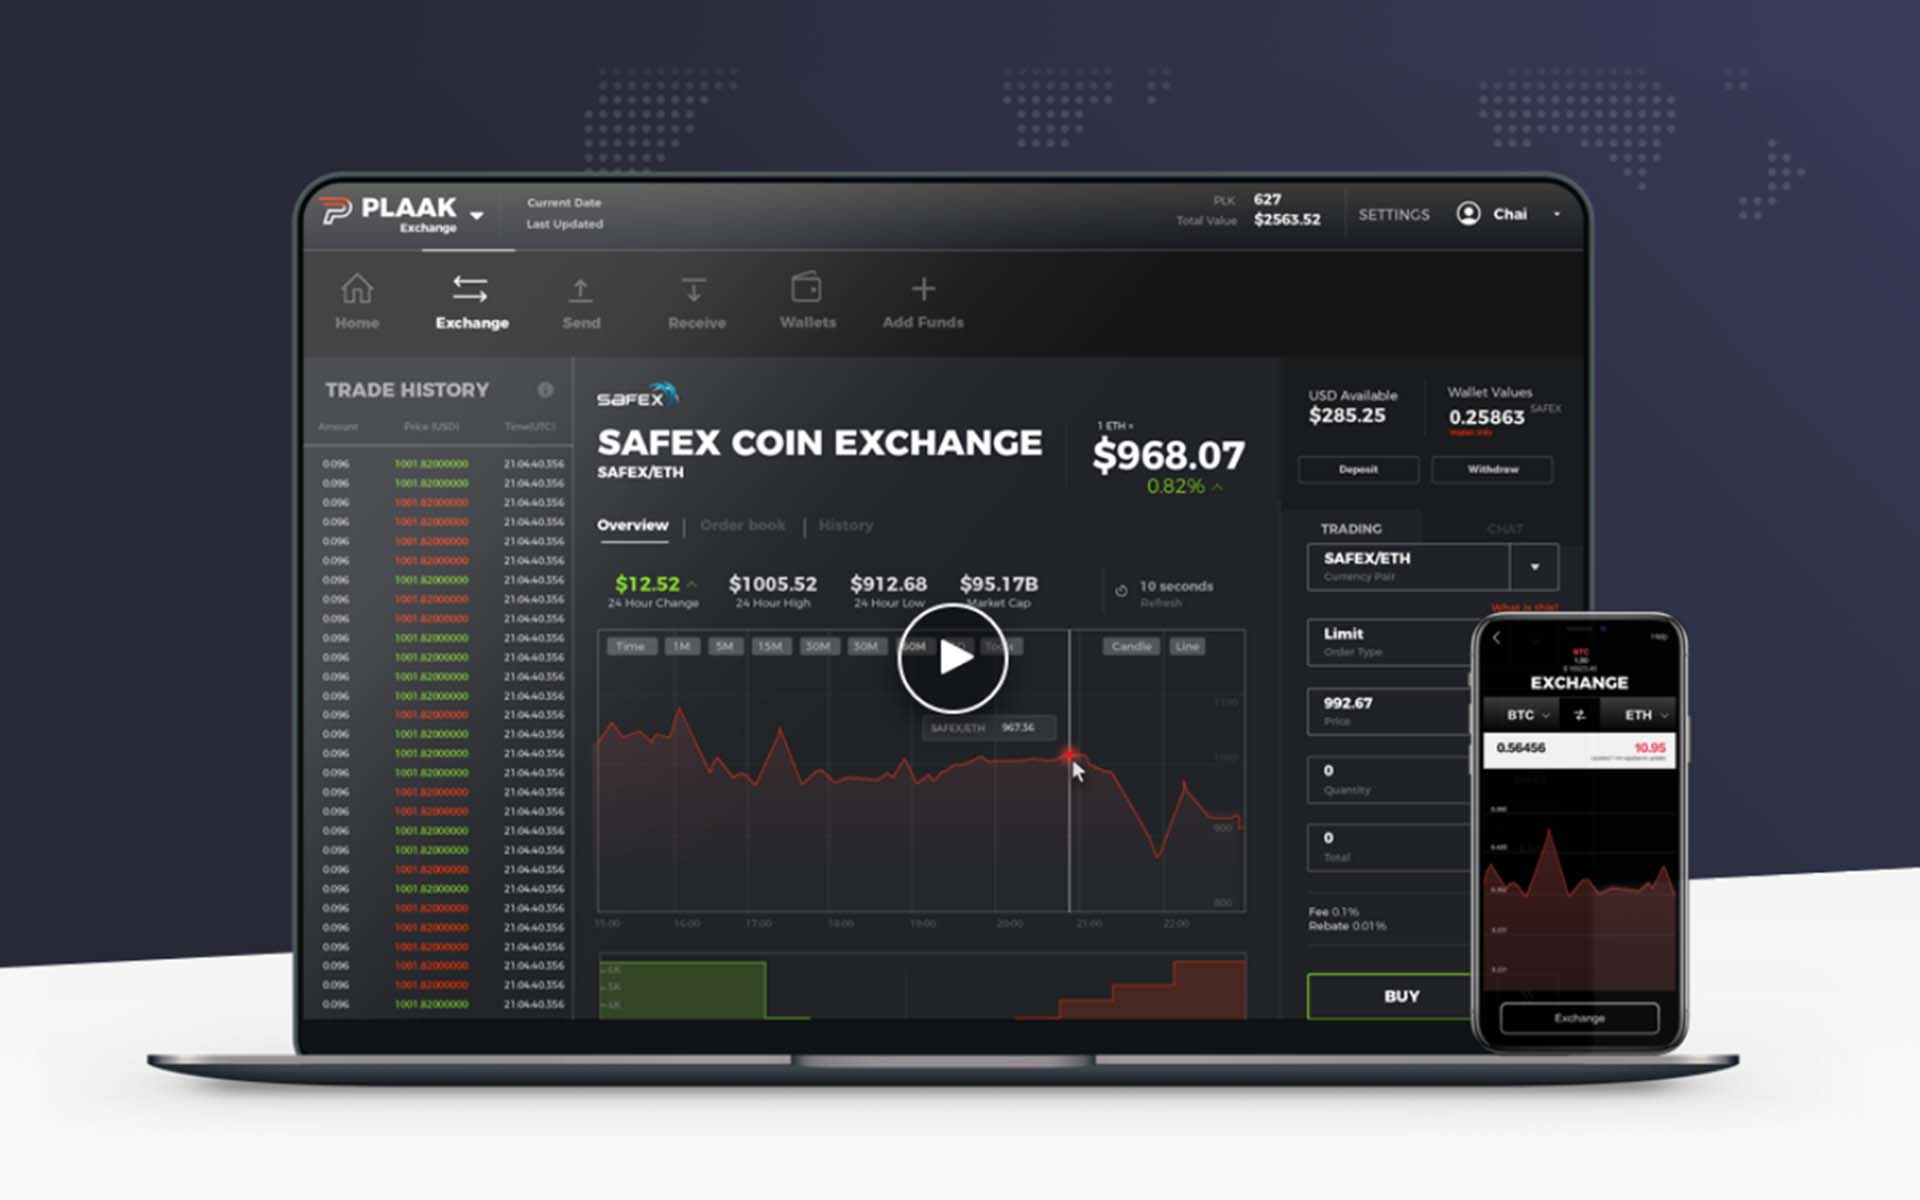 Plaak Is Pleased to Announce That Safex Will List Their Token on Our up and Coming Plaak Exchange.